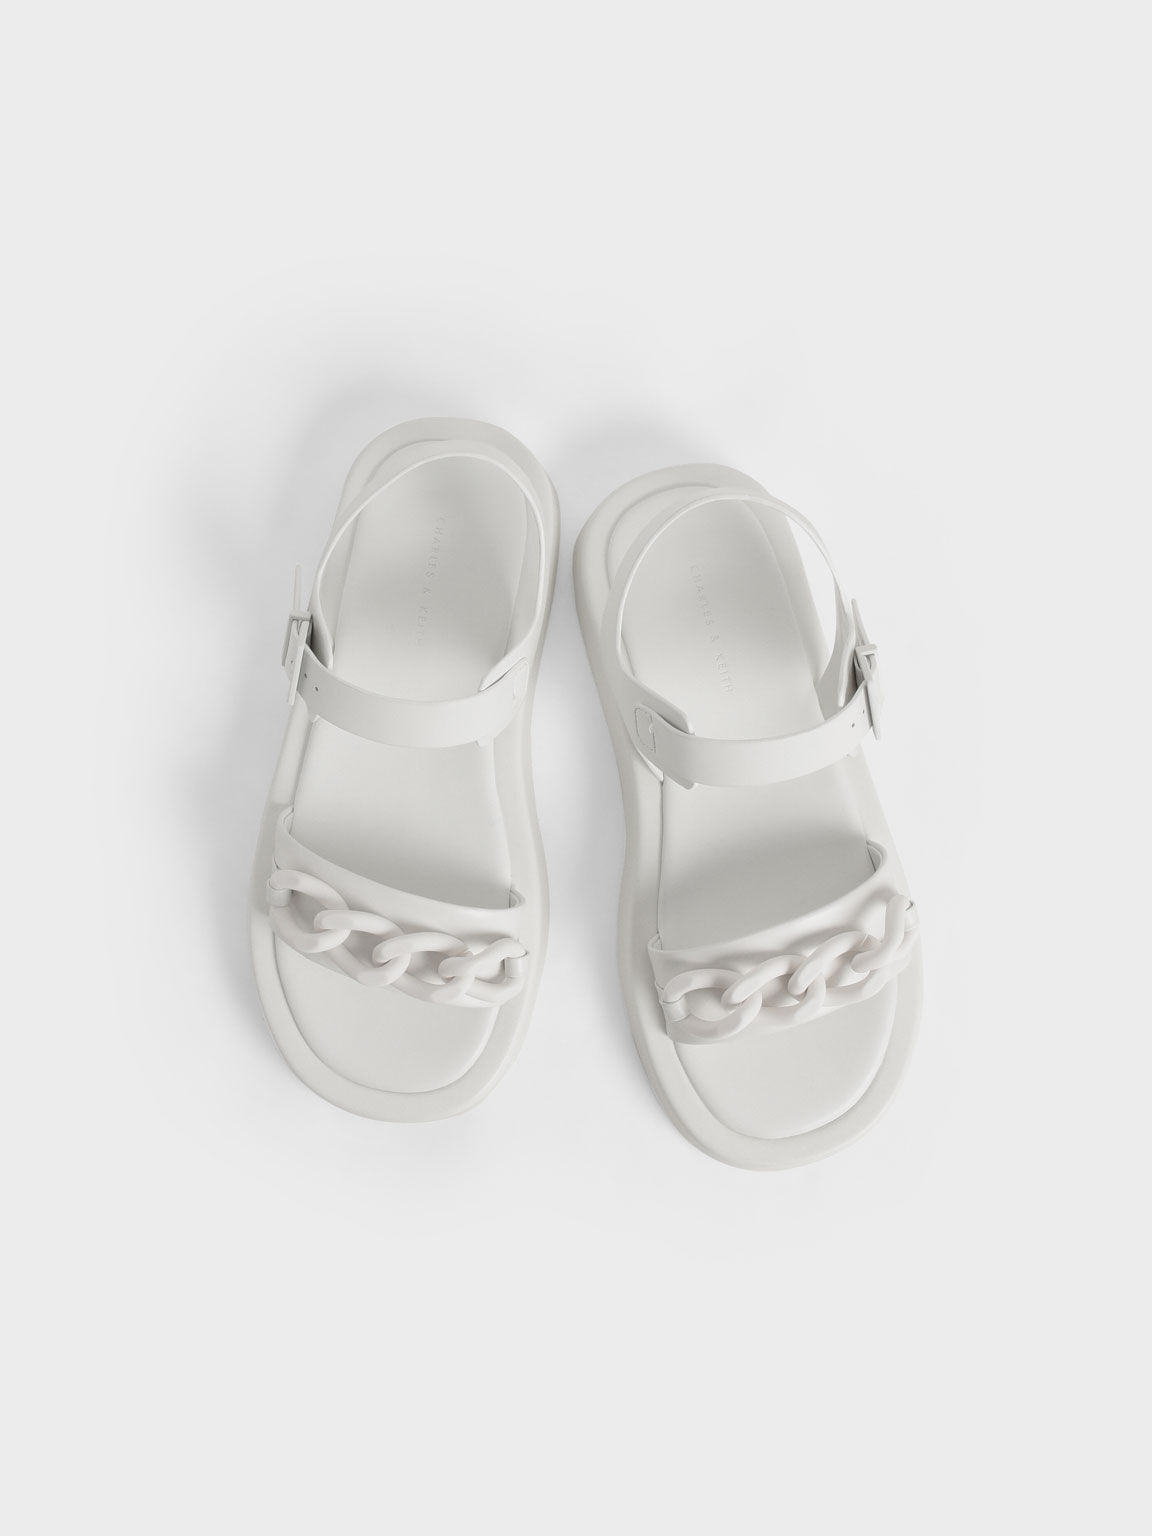 Sandal Ankle Strap Padded Chunky Chain-Link, White, hi-res